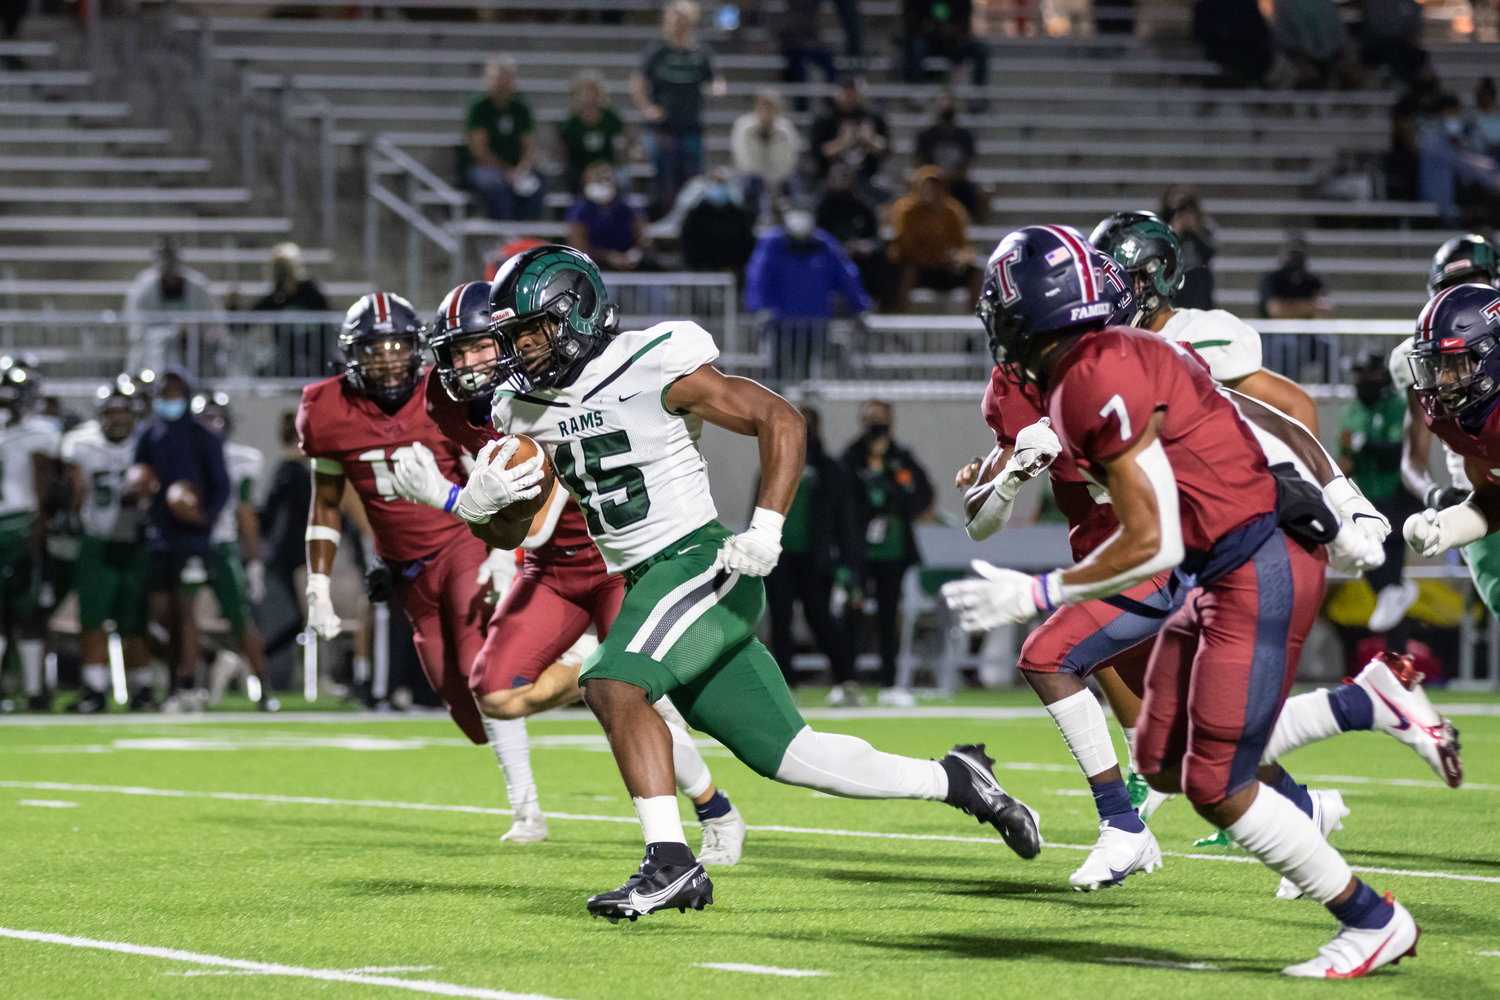 Mayde Creek running back Julius Loughridge gains separation from defenders during Tompkins' win over Mayde Creek on Thursday evening at Legacy Stadium.